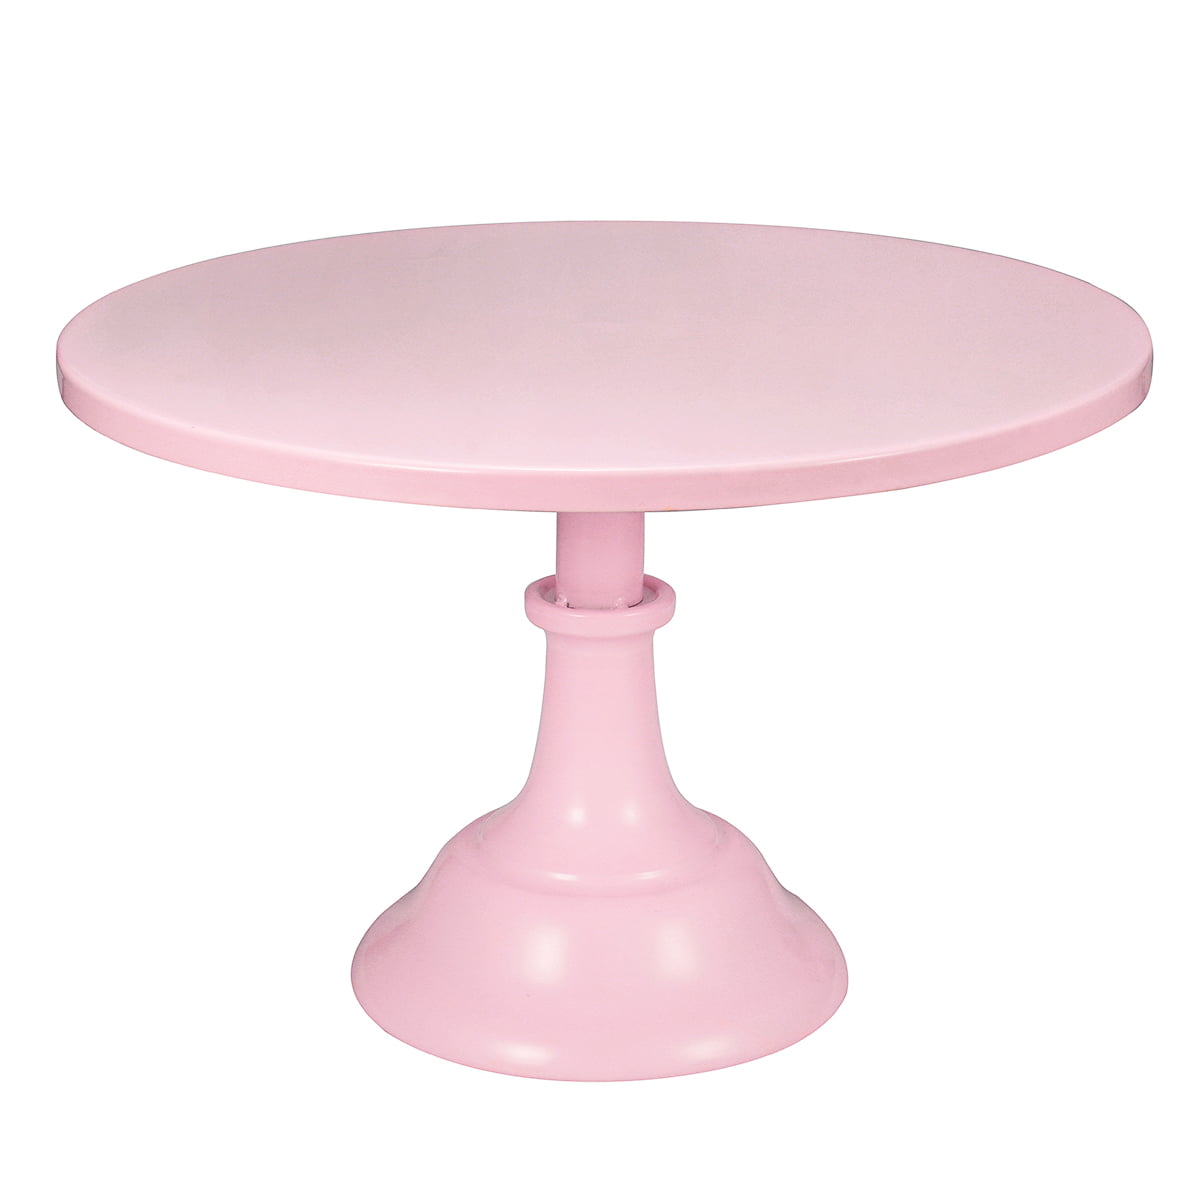 12-Inch CAKE STAND Metal Cupcake Wedding Party Event Display Pedestal Platter 